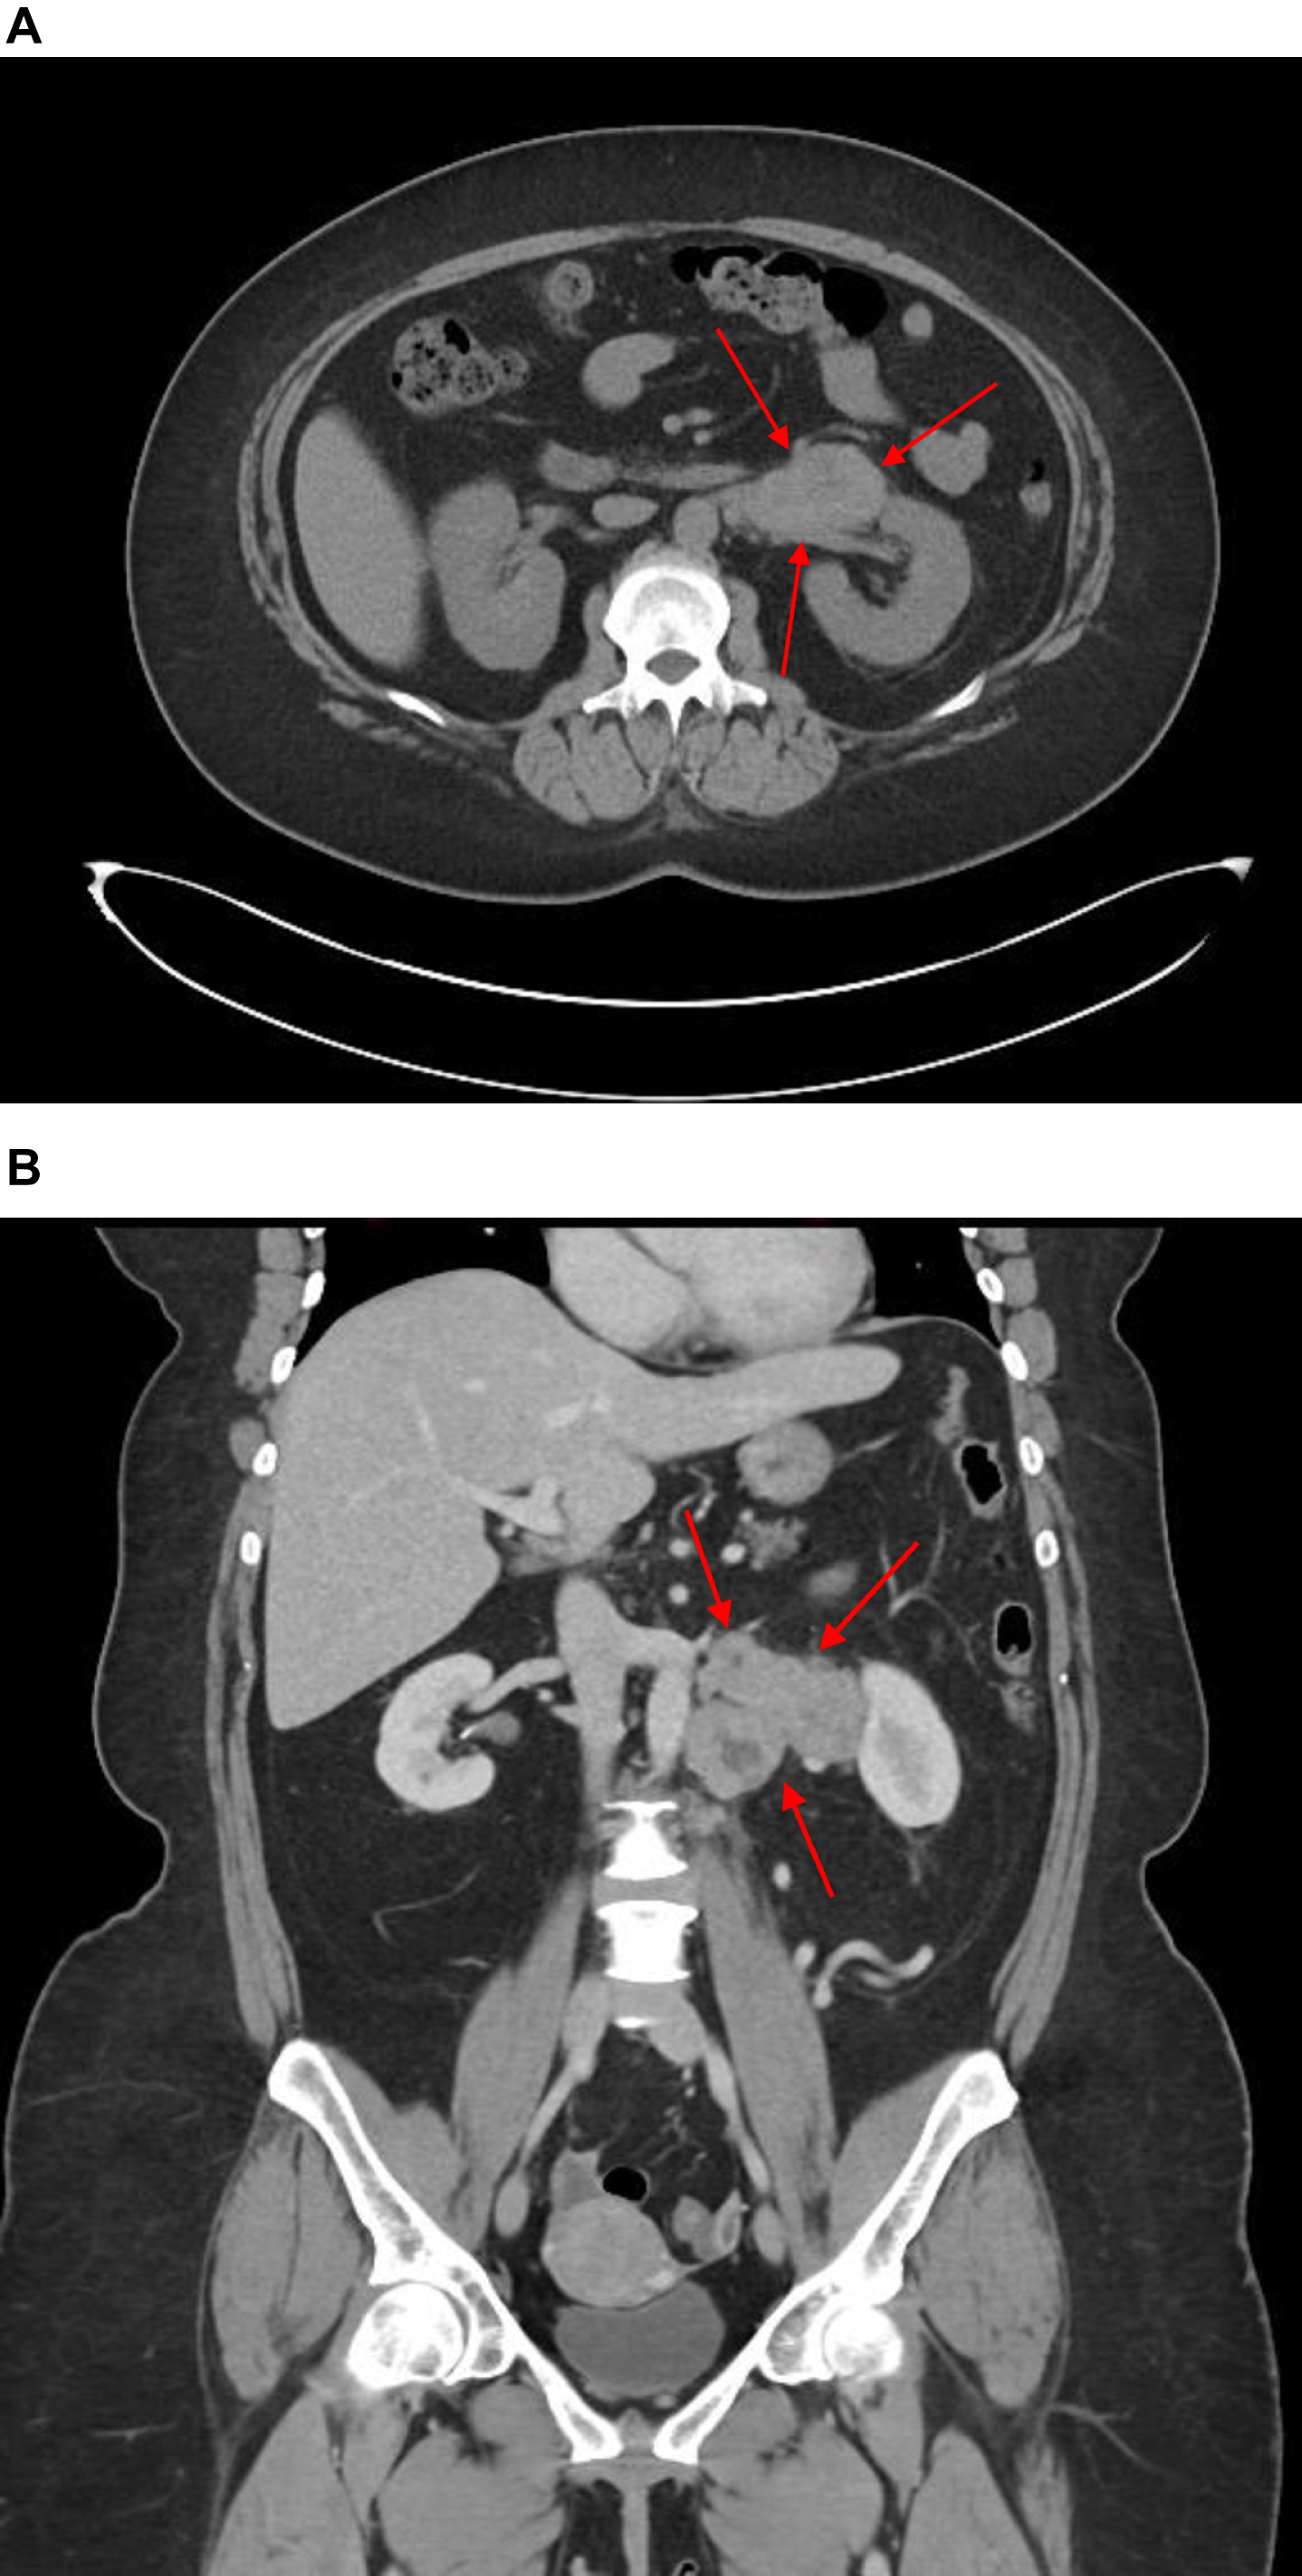 Pre-operative CT scan of left retroperitoneal mass, axial view. B Pre-operative CT scan of left retroperitoneal mass, coronal view. CT scan demonstrates left exophytic pararenal mass with involvement of renal vasculature. As discussed in the text, no clear involvement of the left kidney was evident. Left periaortic lymph node involvement and a normal right kidney can be appreciated.